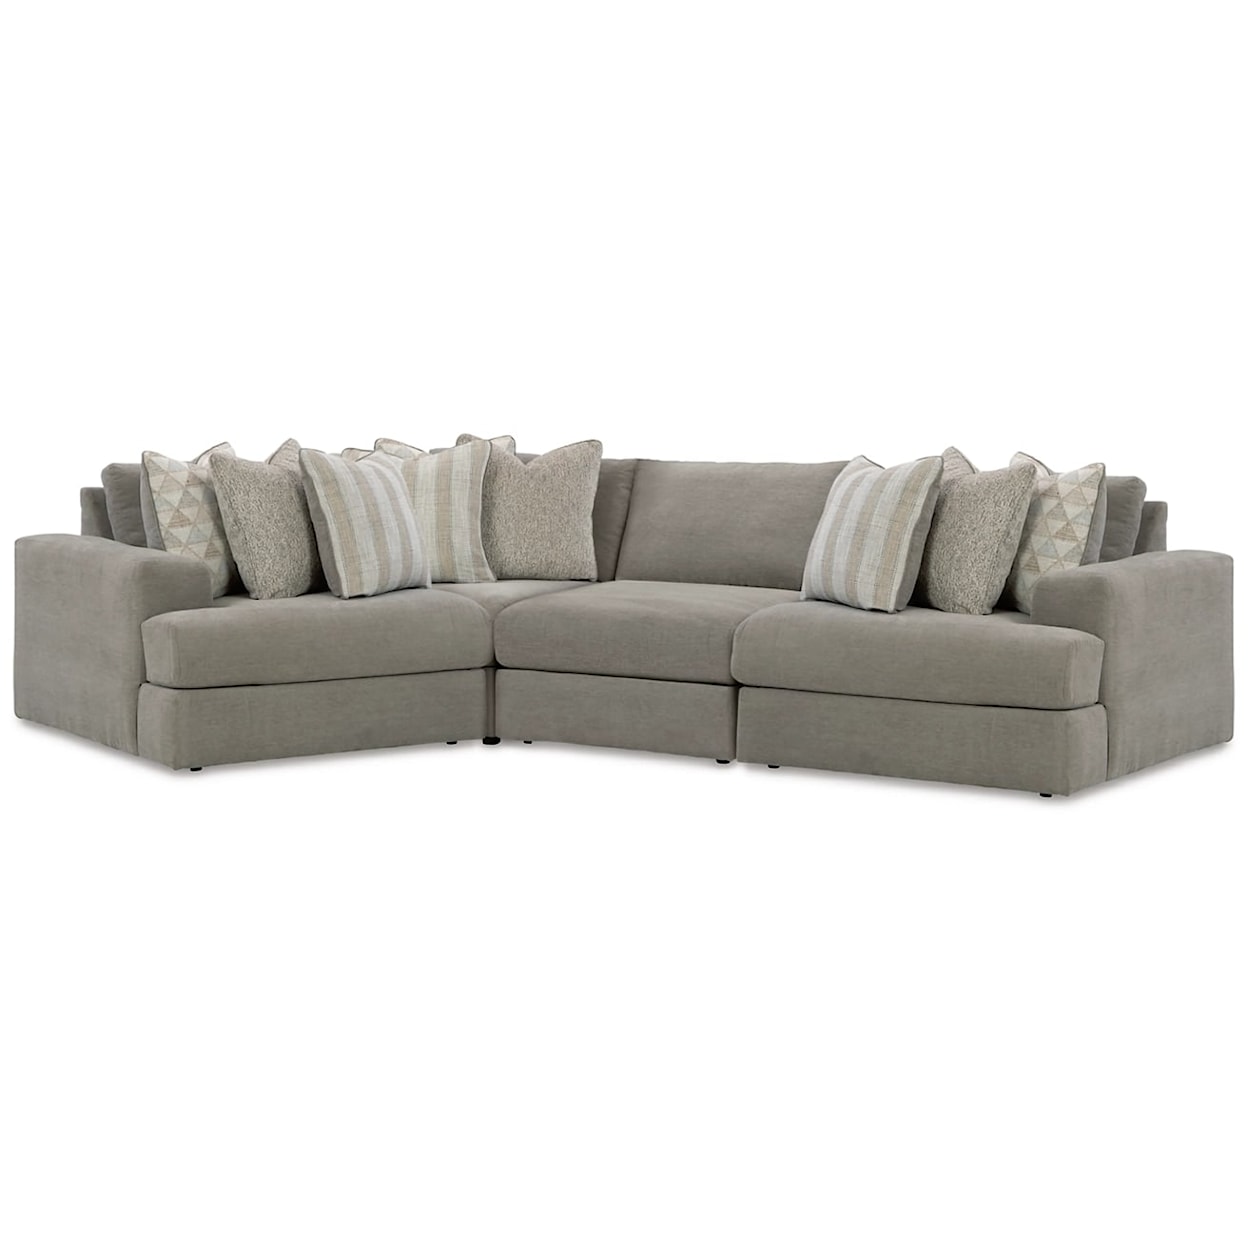 Benchcraft Avaliyah 4-Piece Sectional